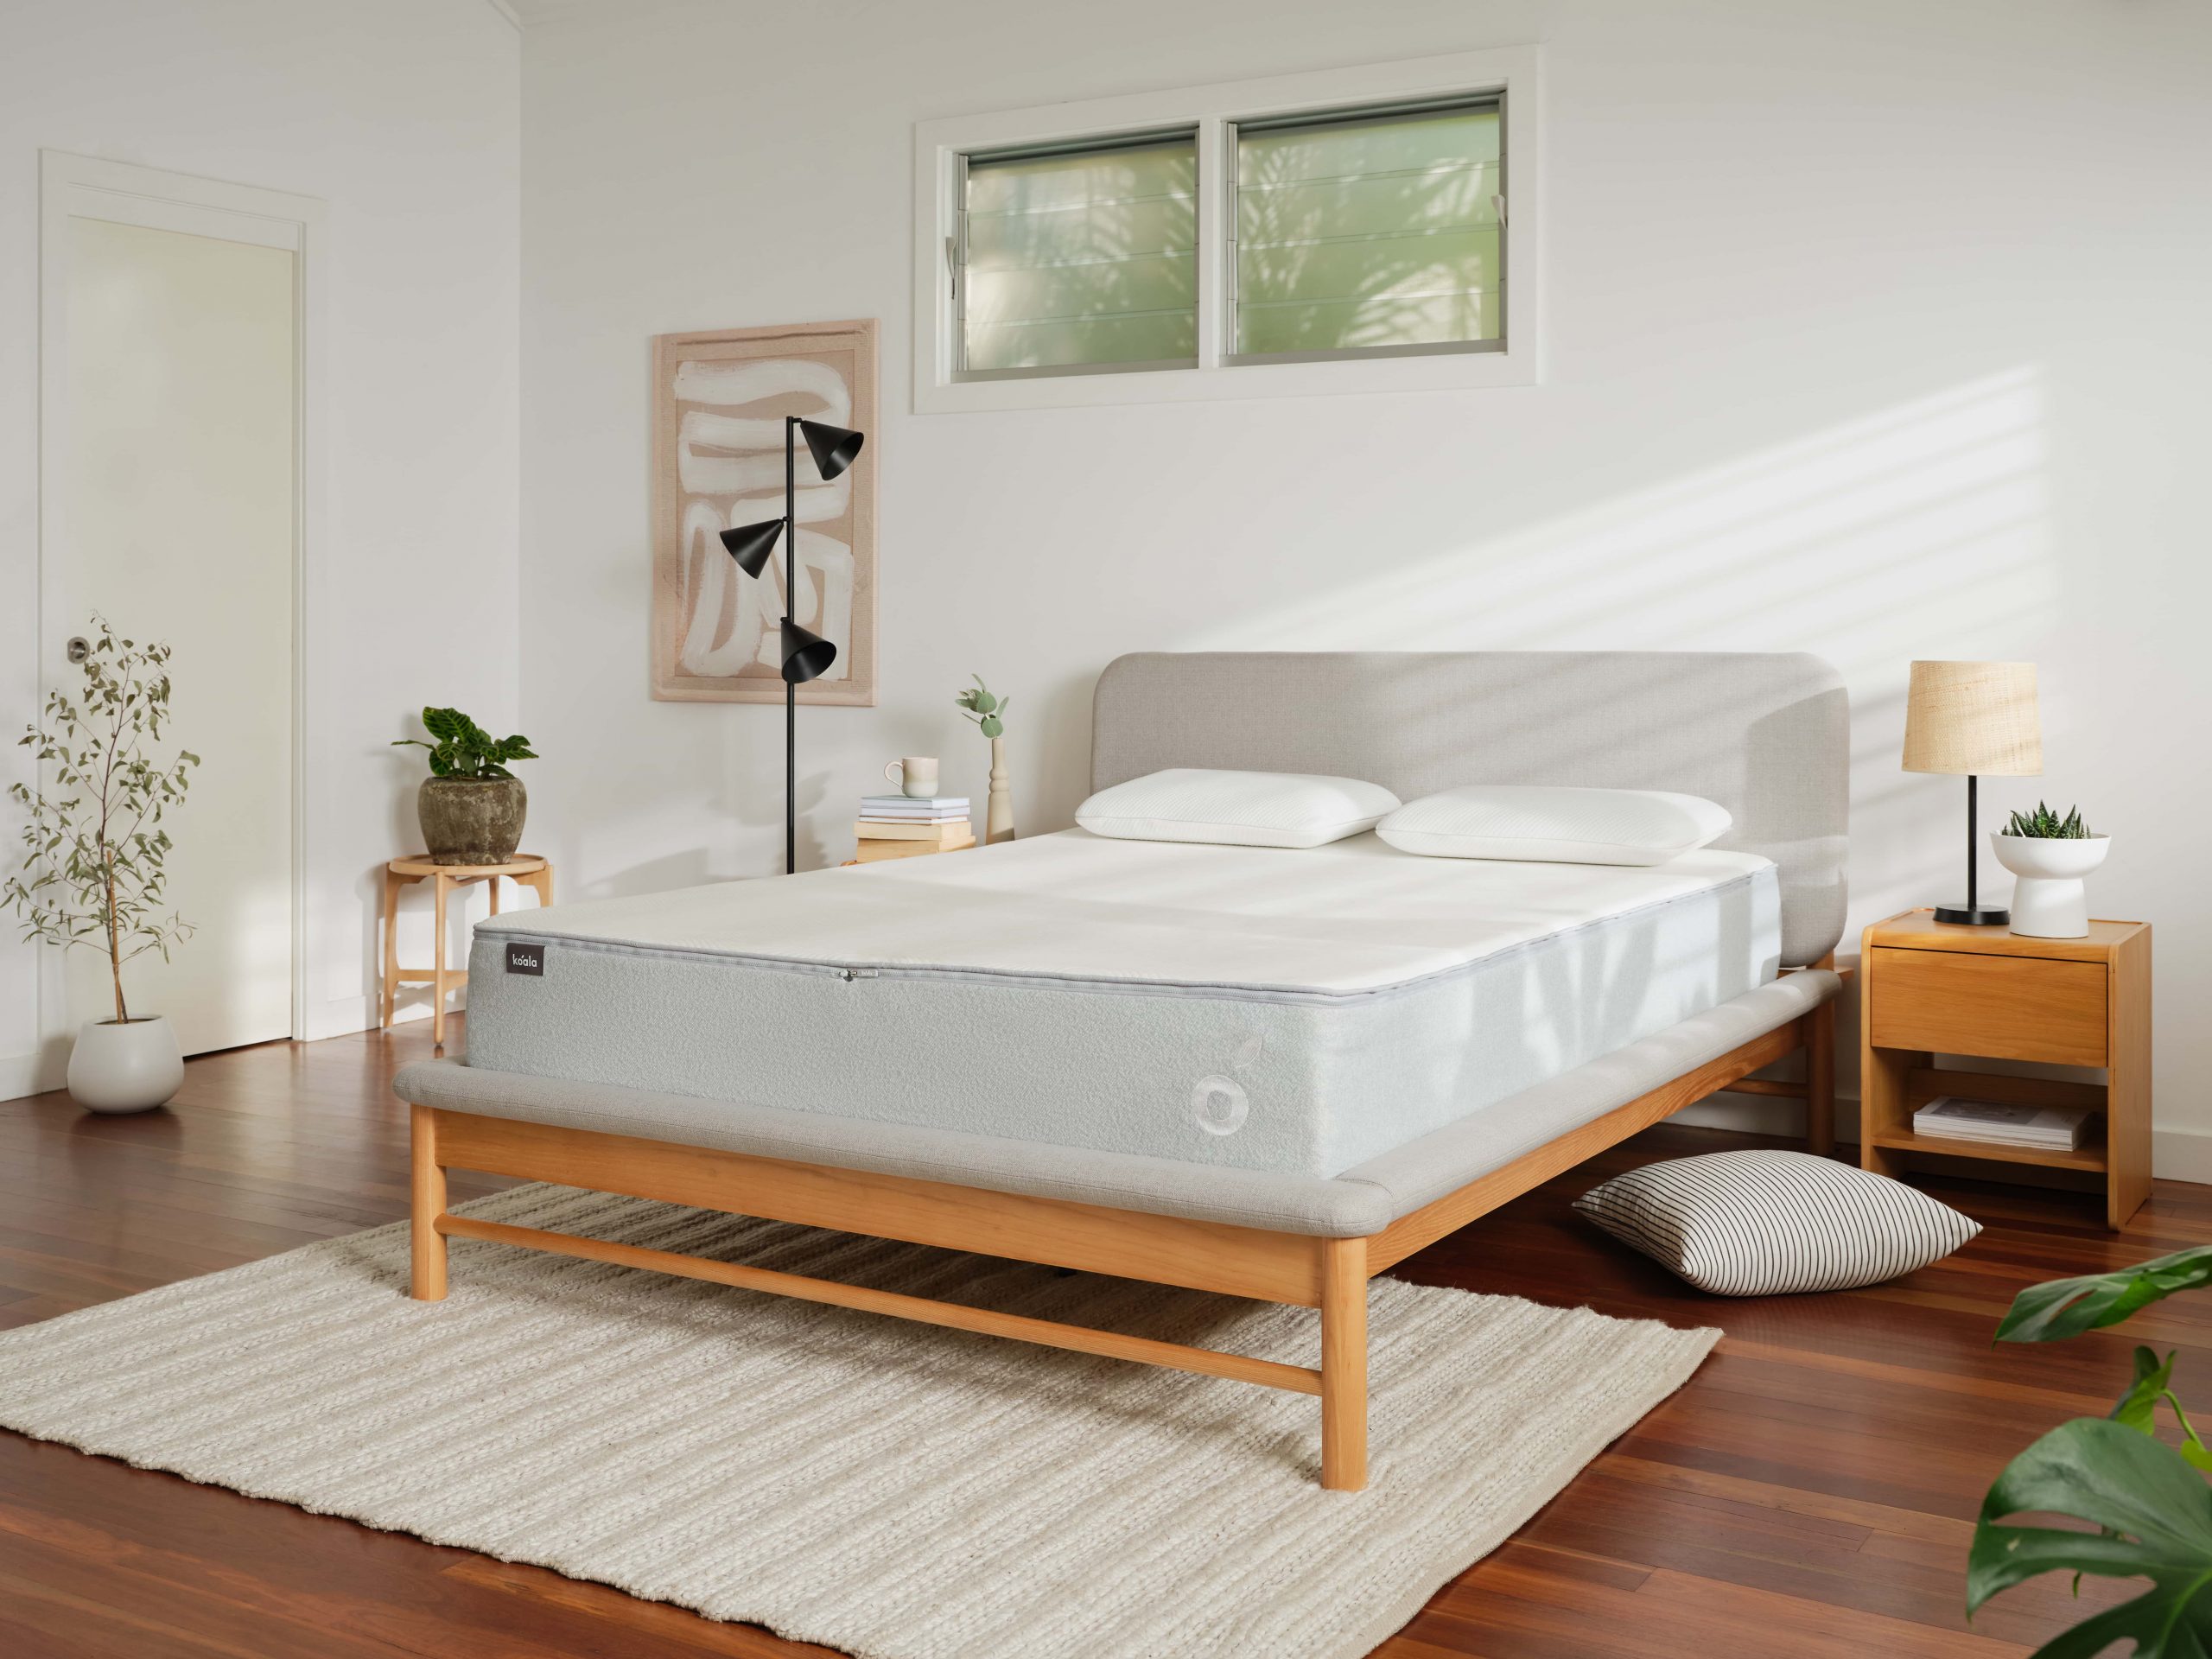 The Award-Winning Koala Mattress is one of the best mattresses in Australia, considered a must-have purchase for new home